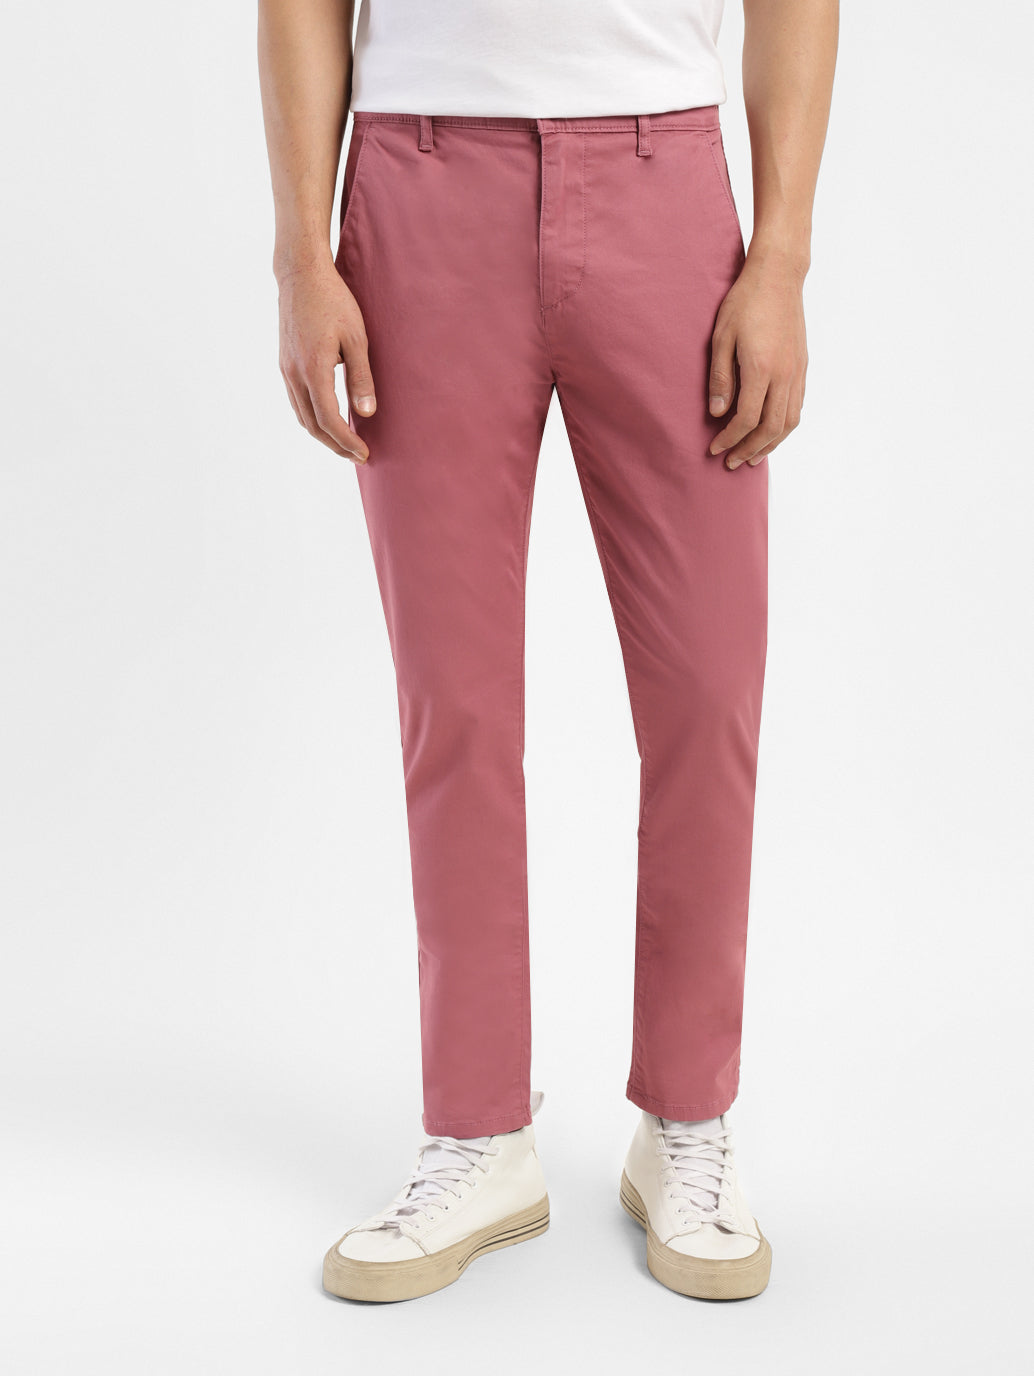 Men's 512 Pink Slim Tapered Fit Chinos